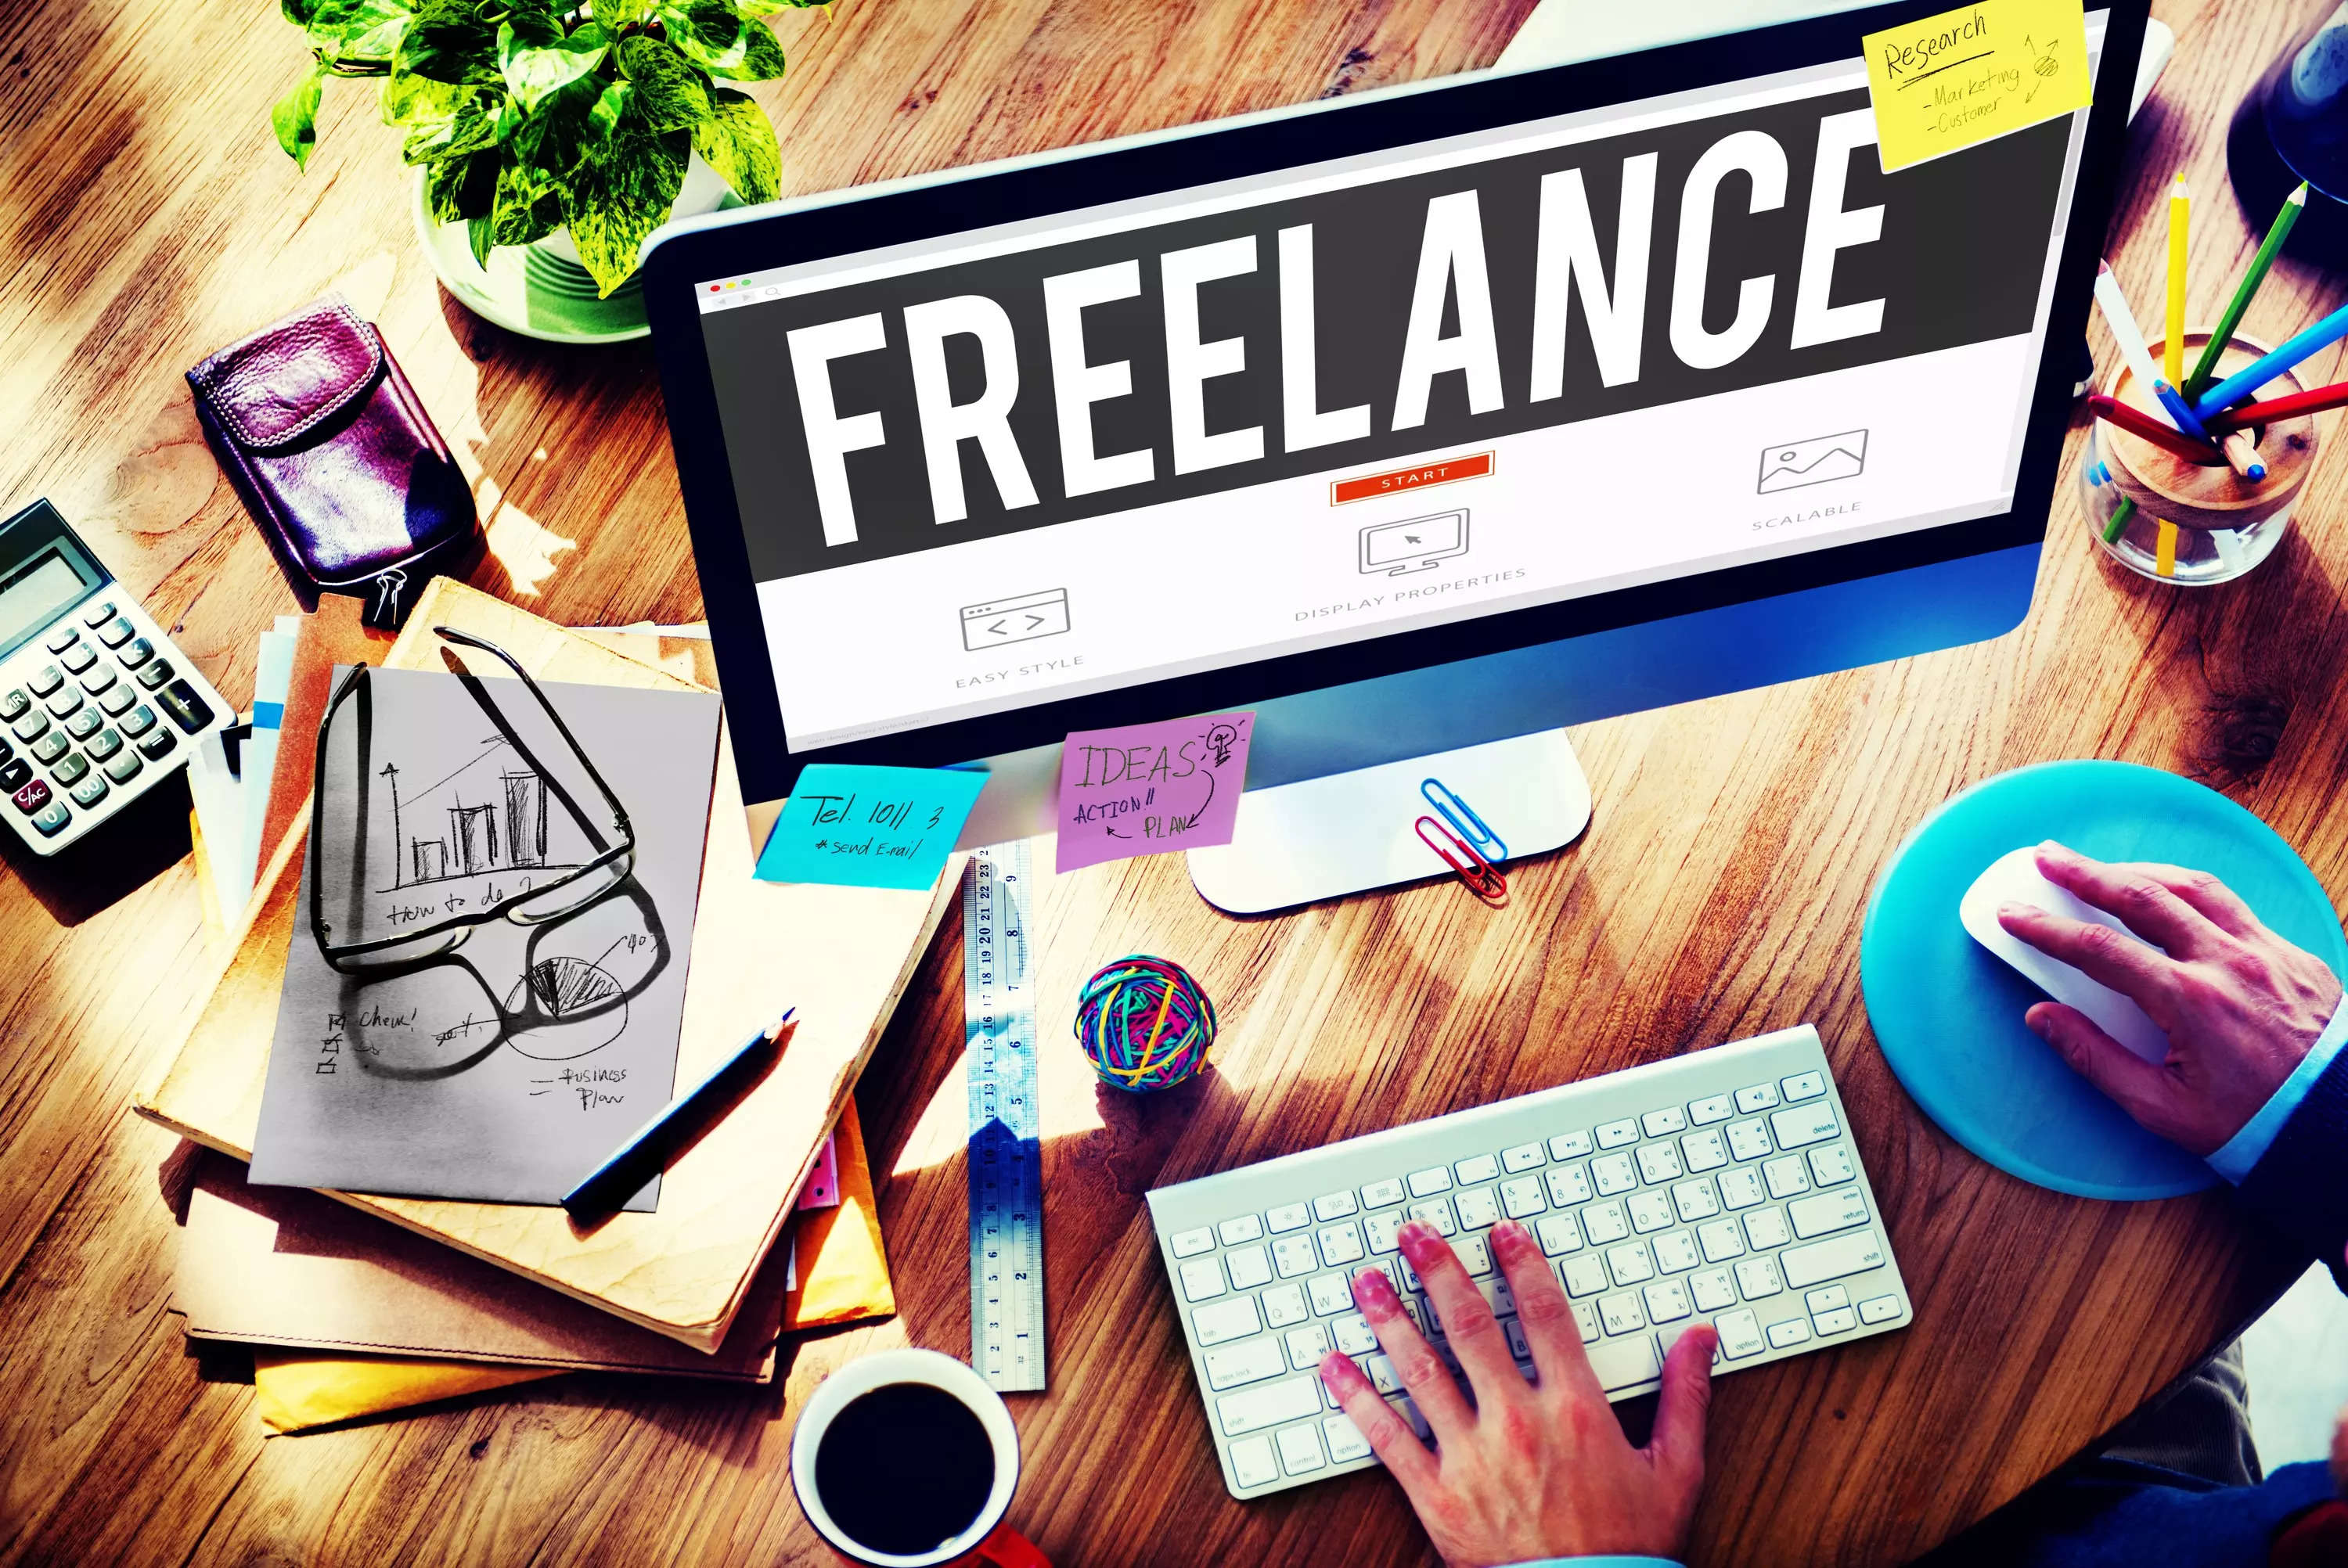 Freelance meaning